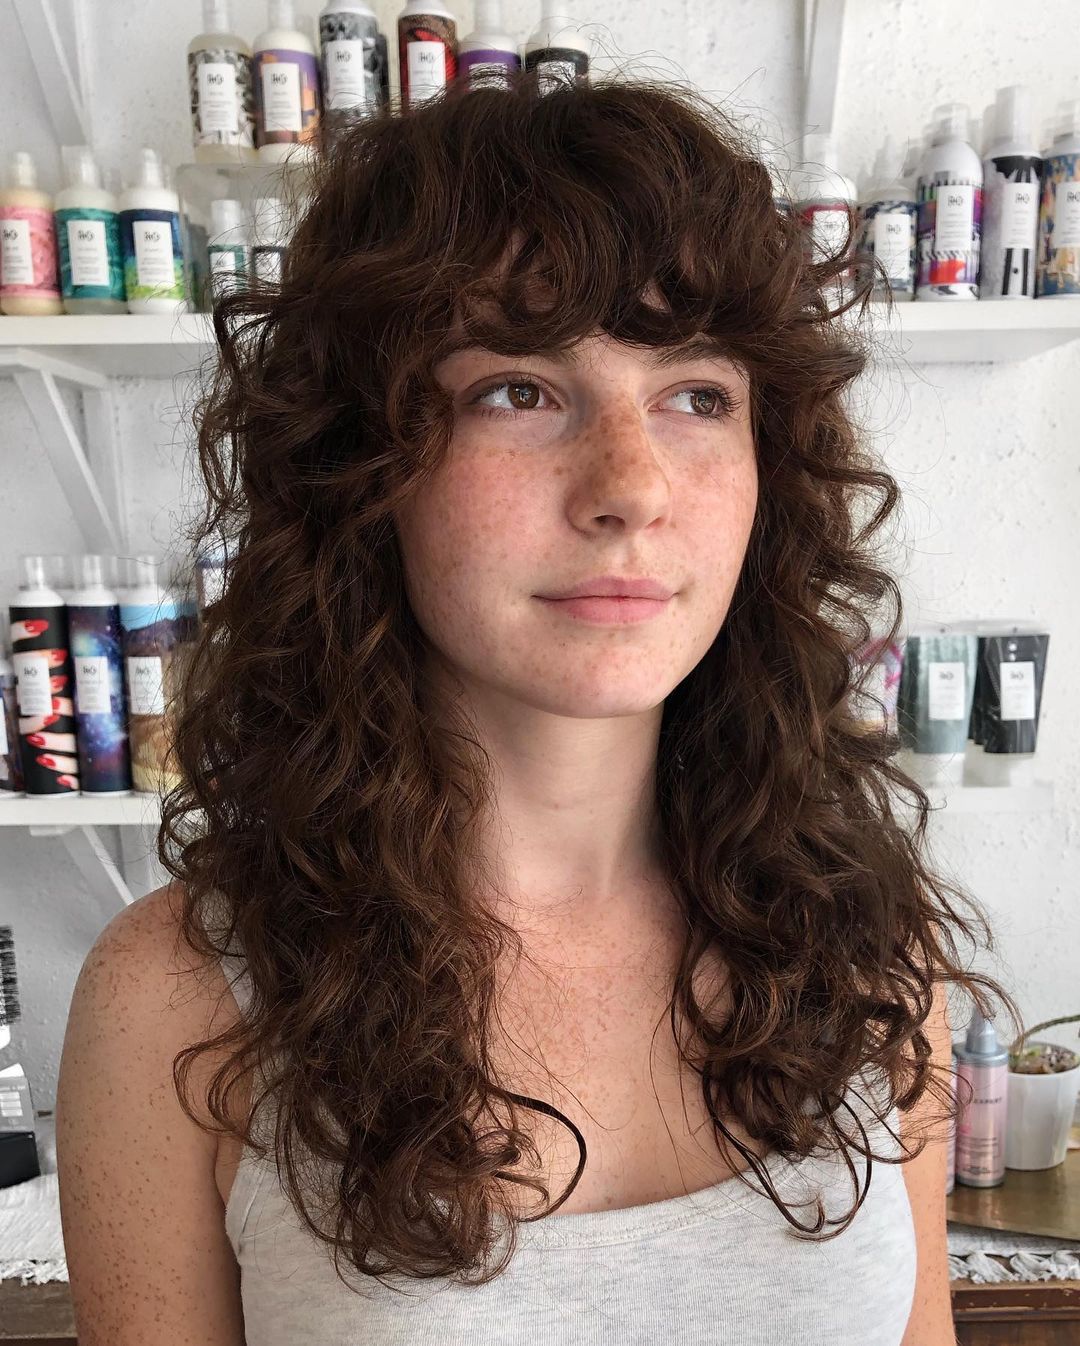 28 Cutest Long Curly Hairstyles